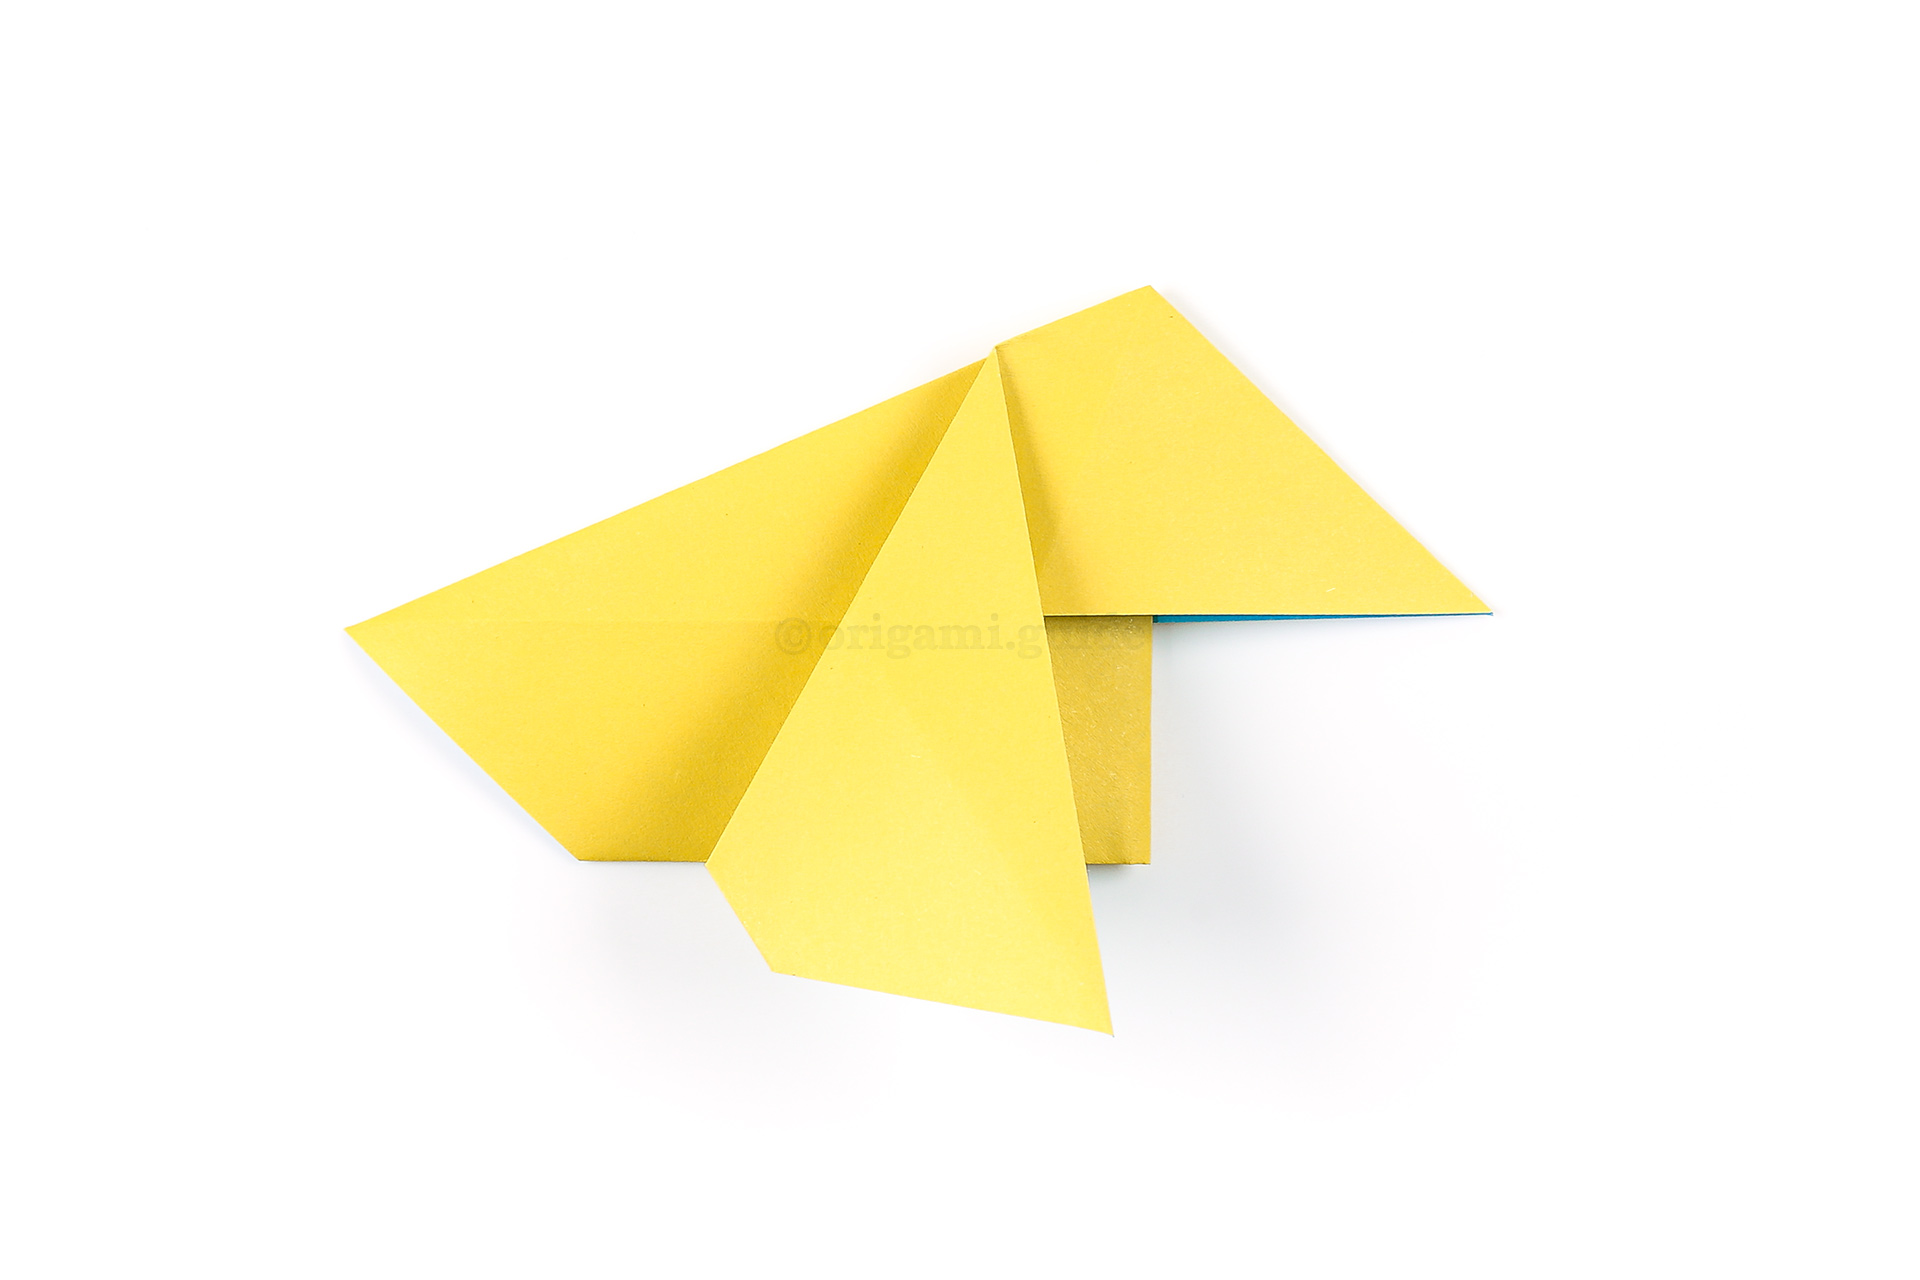 Create a "wing" by folding the top layer from the left diagonally down to the right.